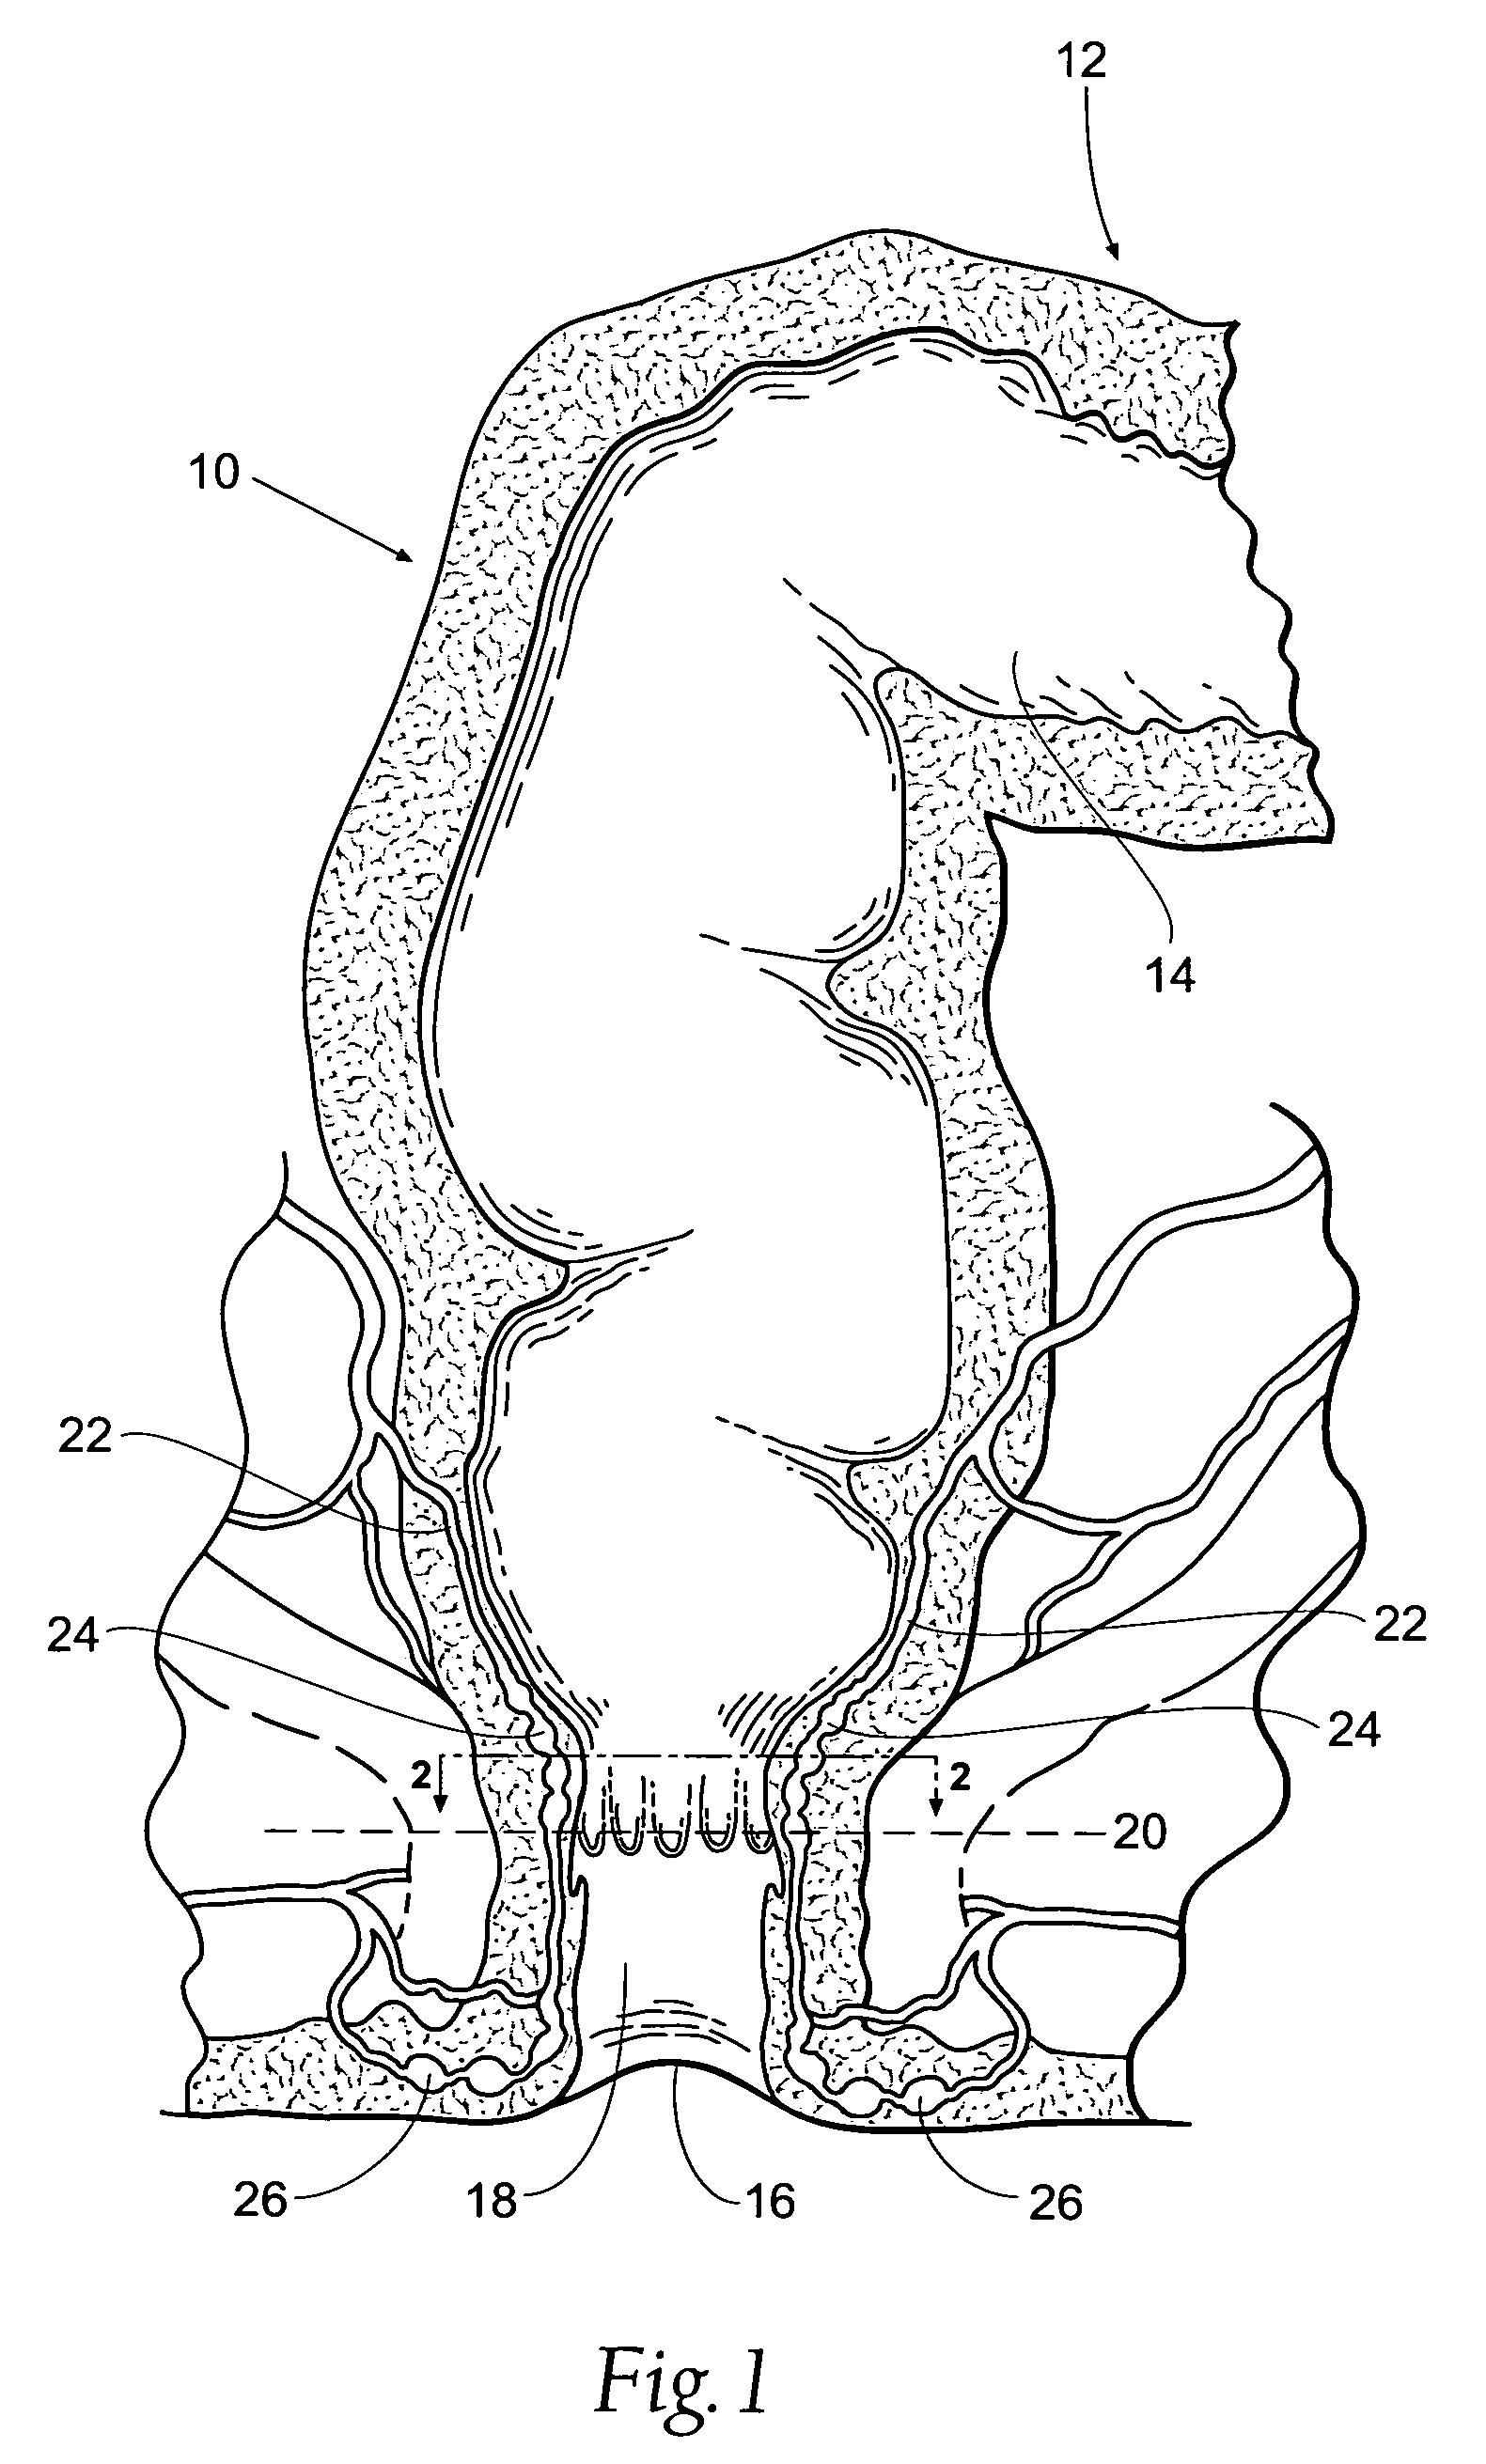 Systems and methods for treating hemorrhoids